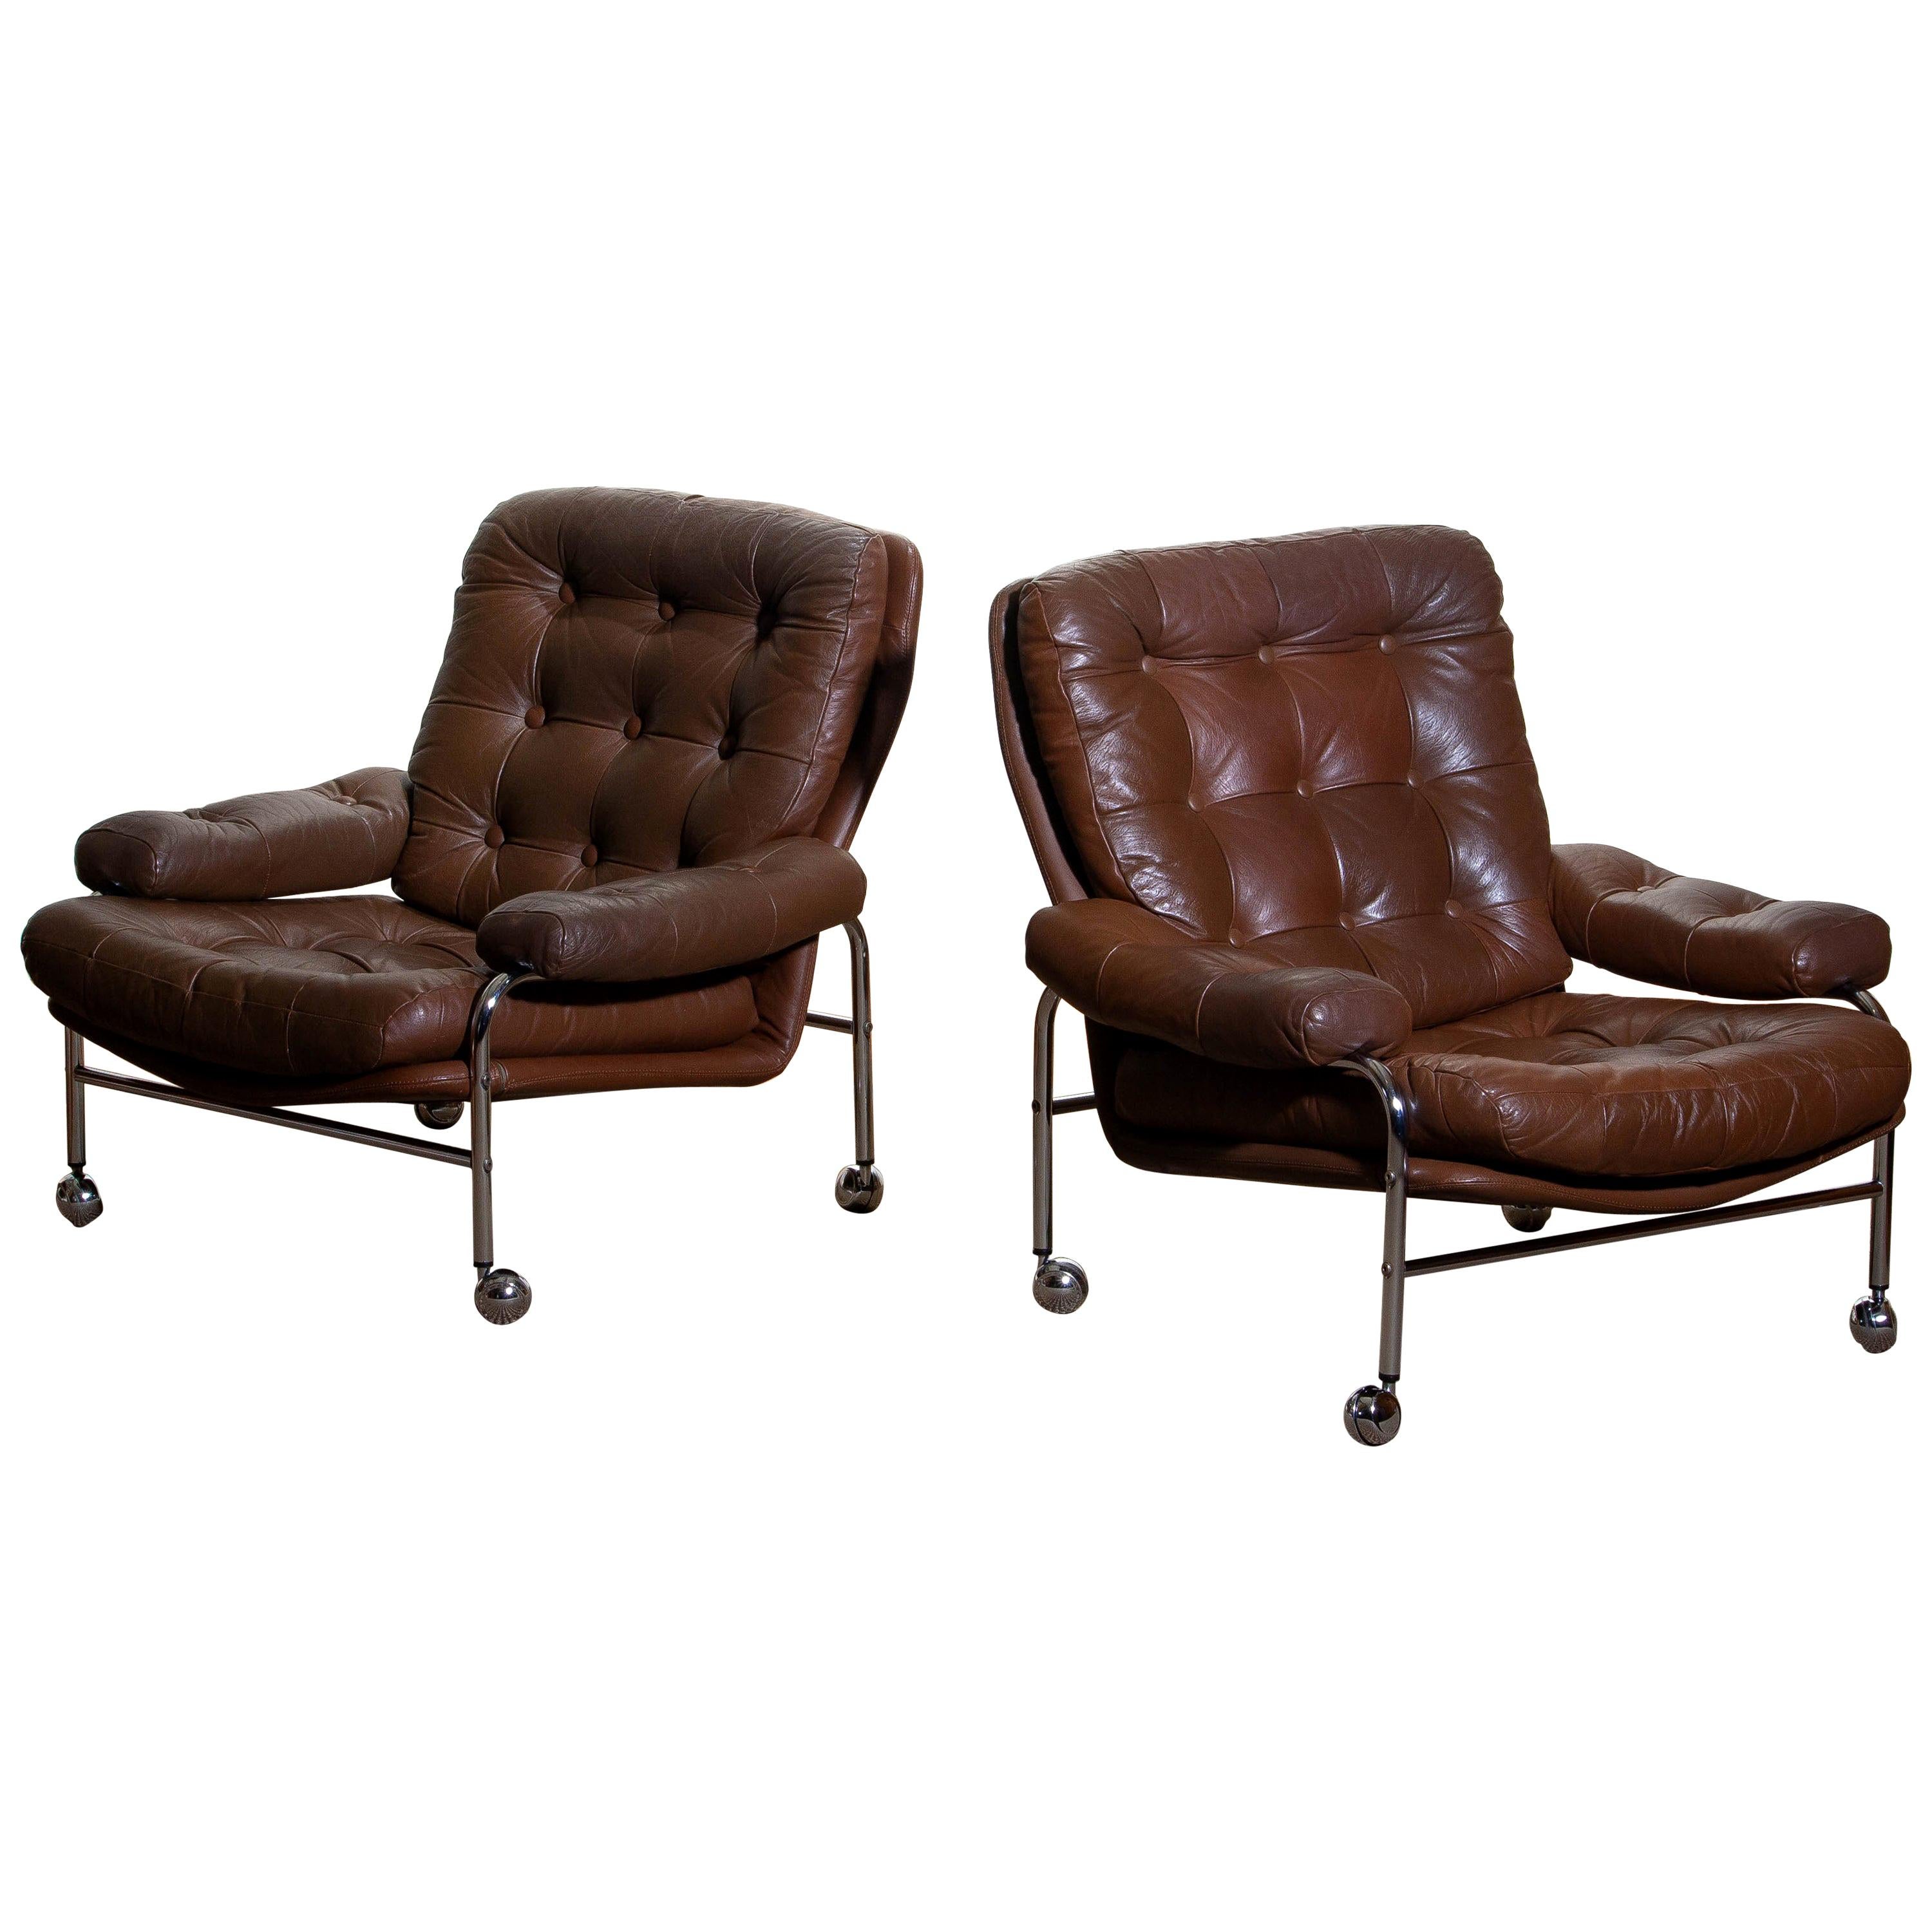 1970s, Chrome and Brown Leather Lounge Chairs by Scapa Rydaholm, Sweden 4